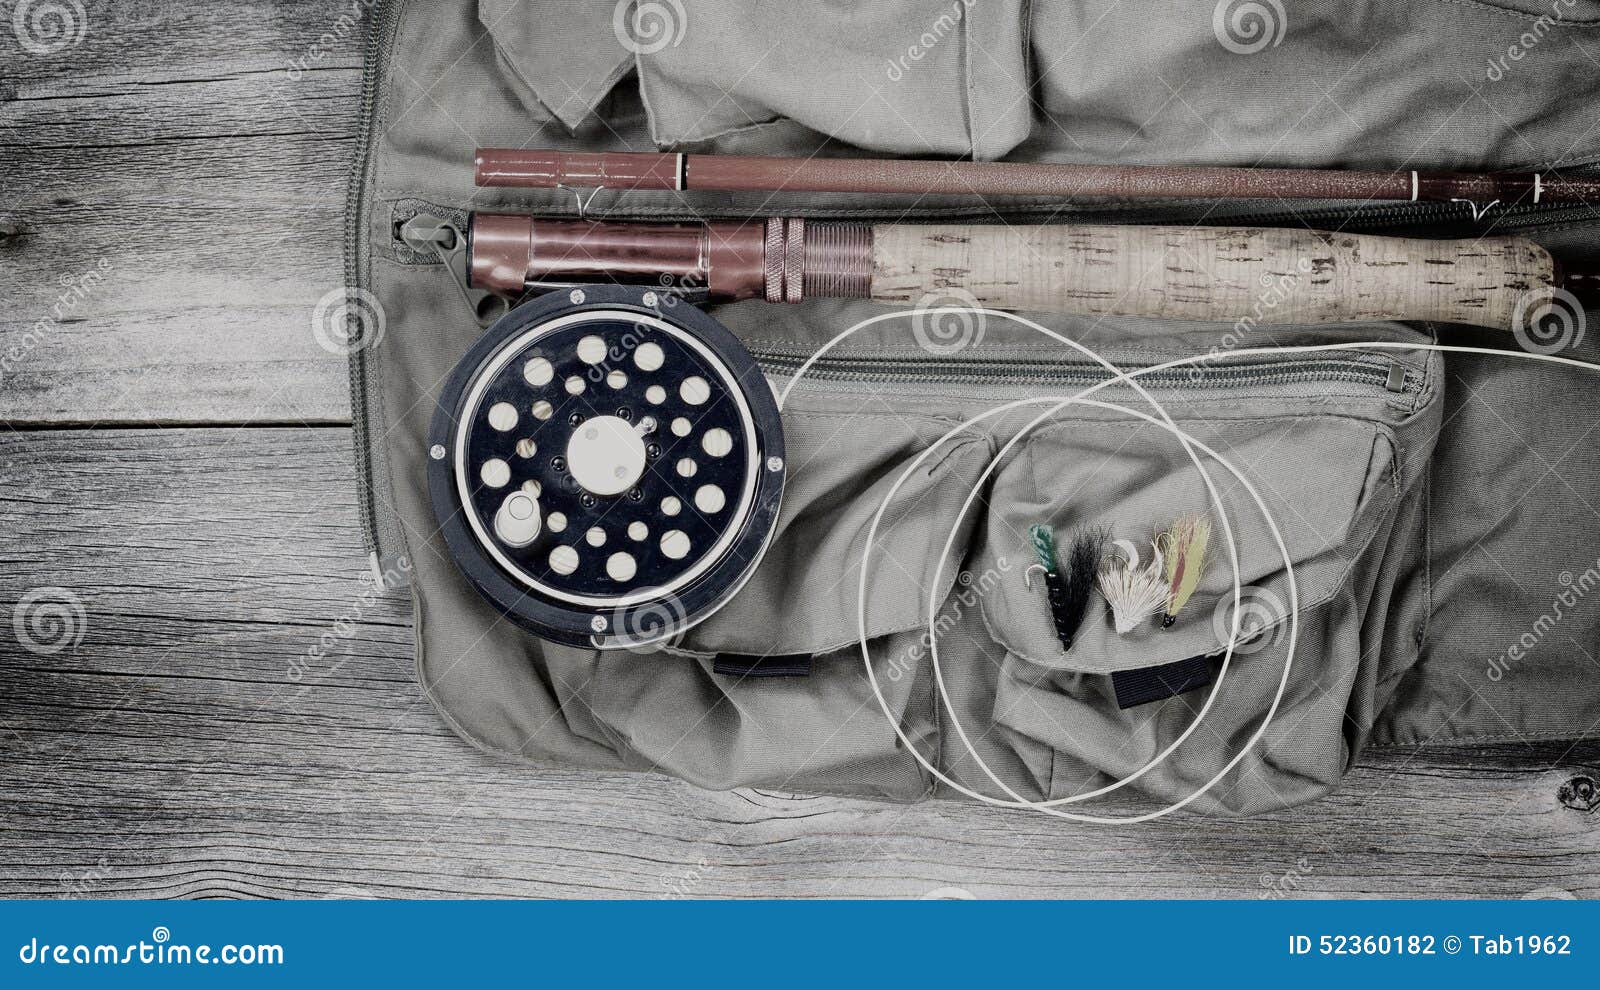 Old Trout Fishing Gear on Top of Fishing Vest Stock Photo - Image of fish,  fishing: 52360182